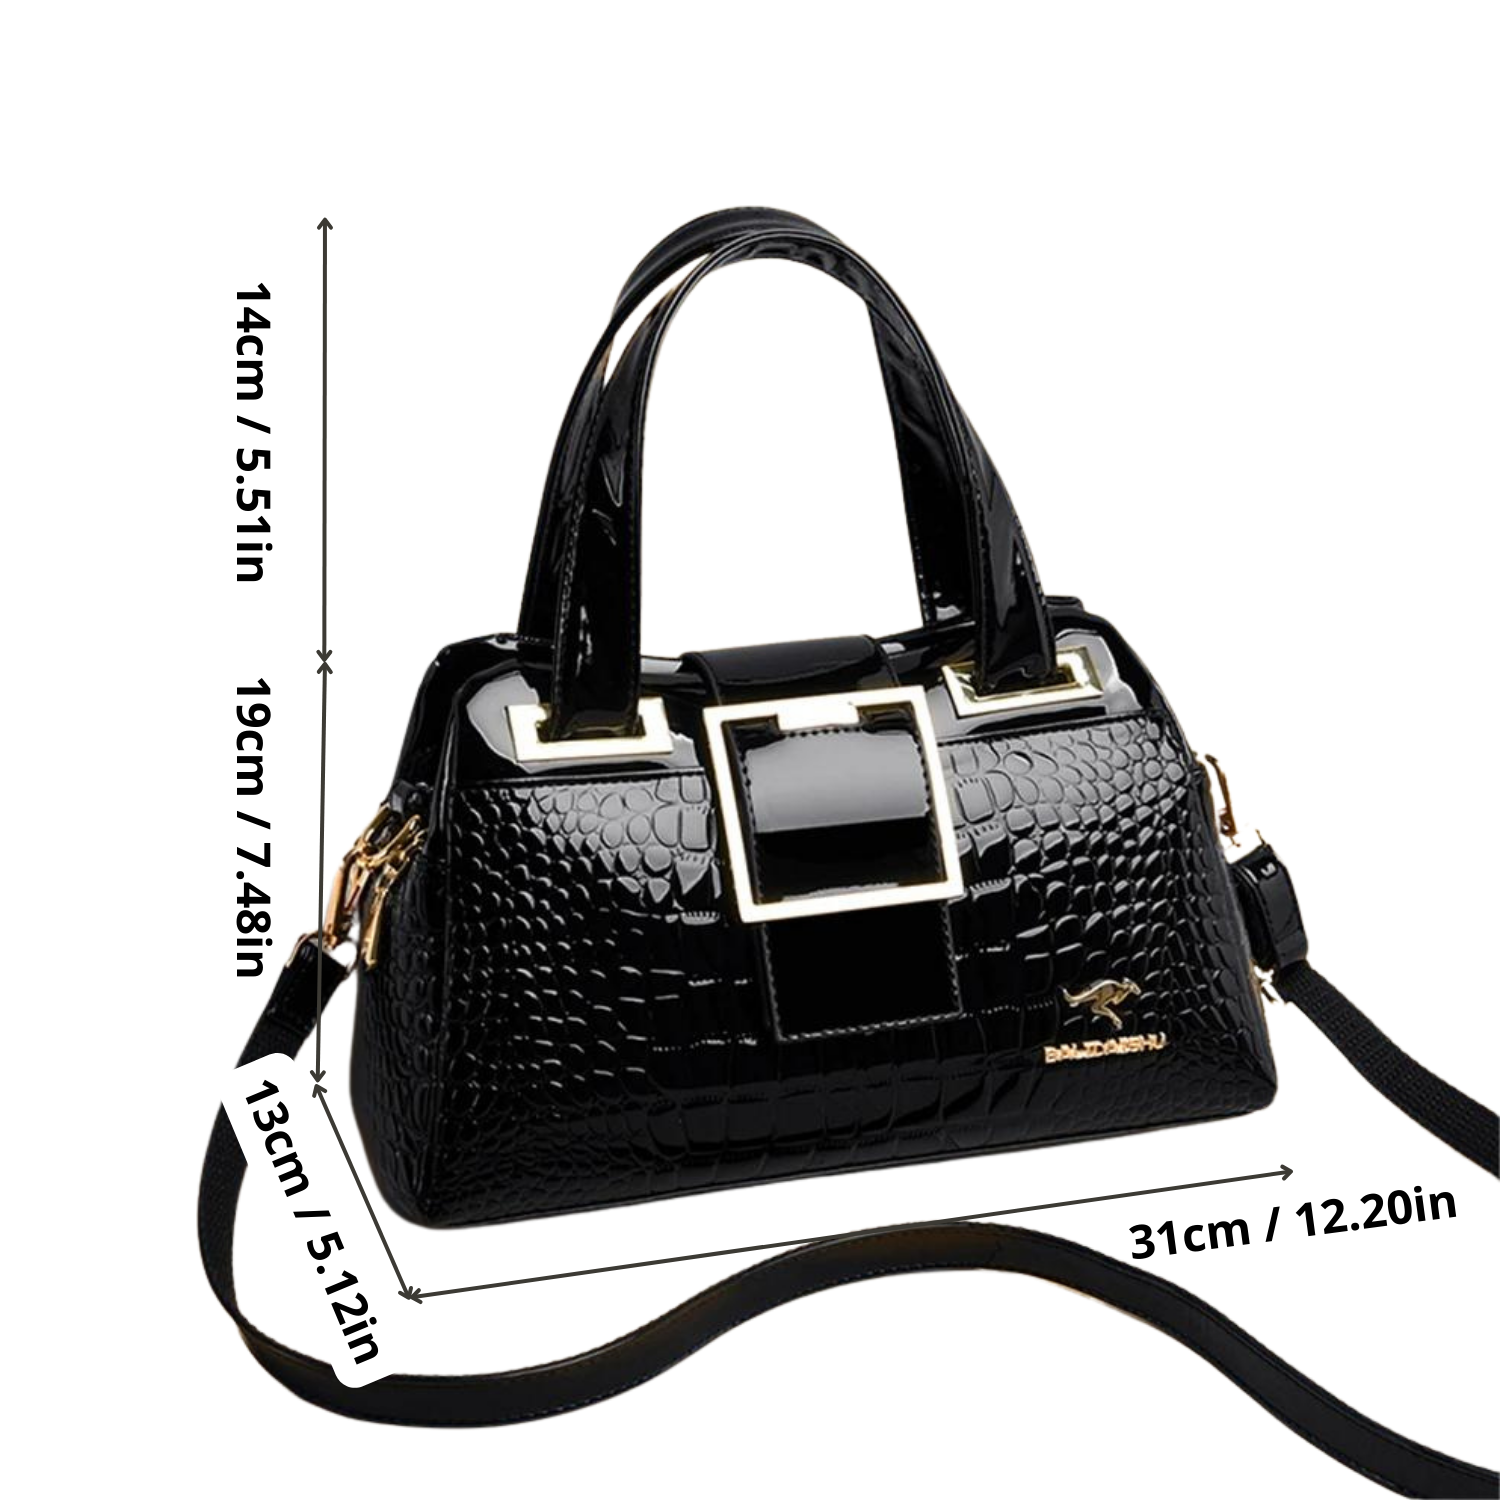 Chic Croc-Embossed Leather Crossbody Tote